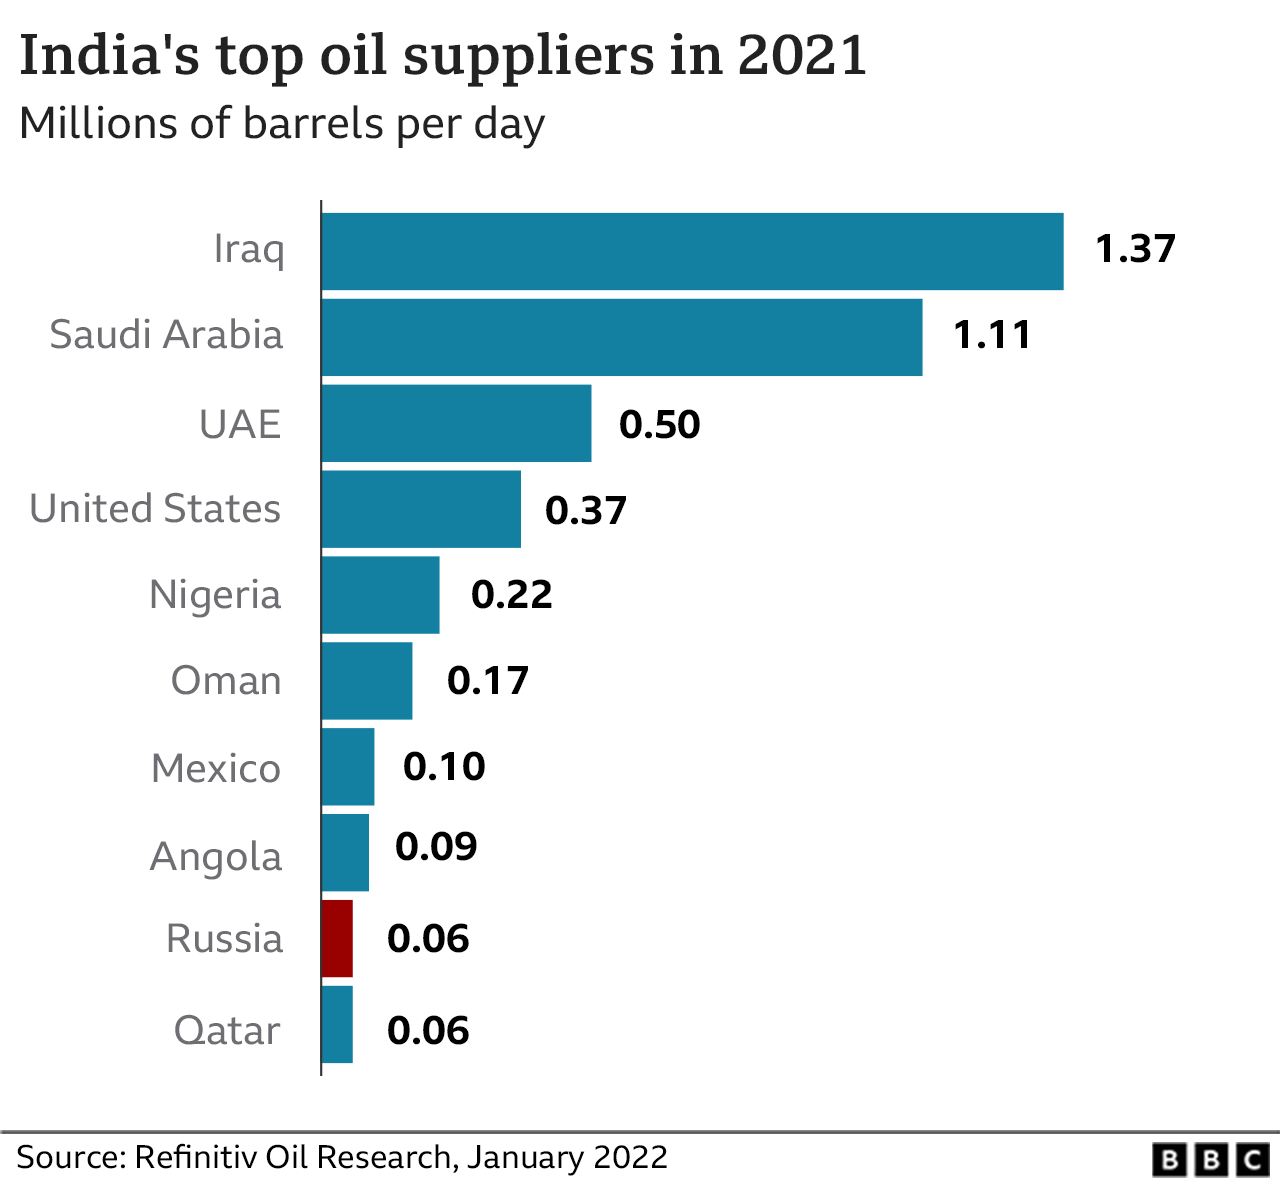 Chart on India's oil suppliers in 2021